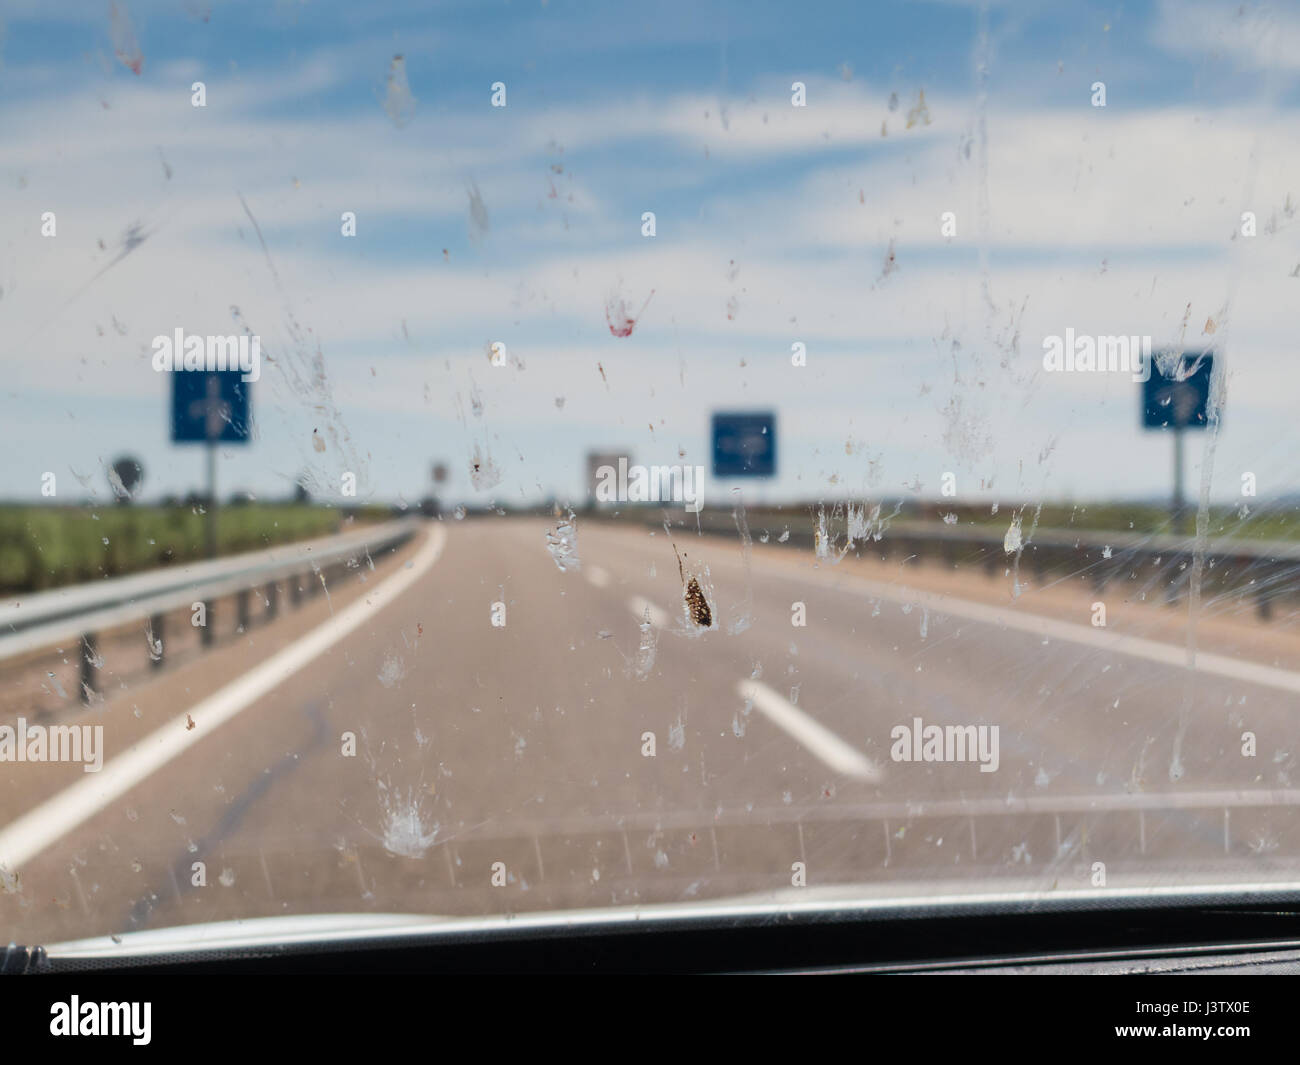 Splattering of dead insects on a car windscreen, windshield whilst driving along a road with signs and road  white markings. Stock Photo